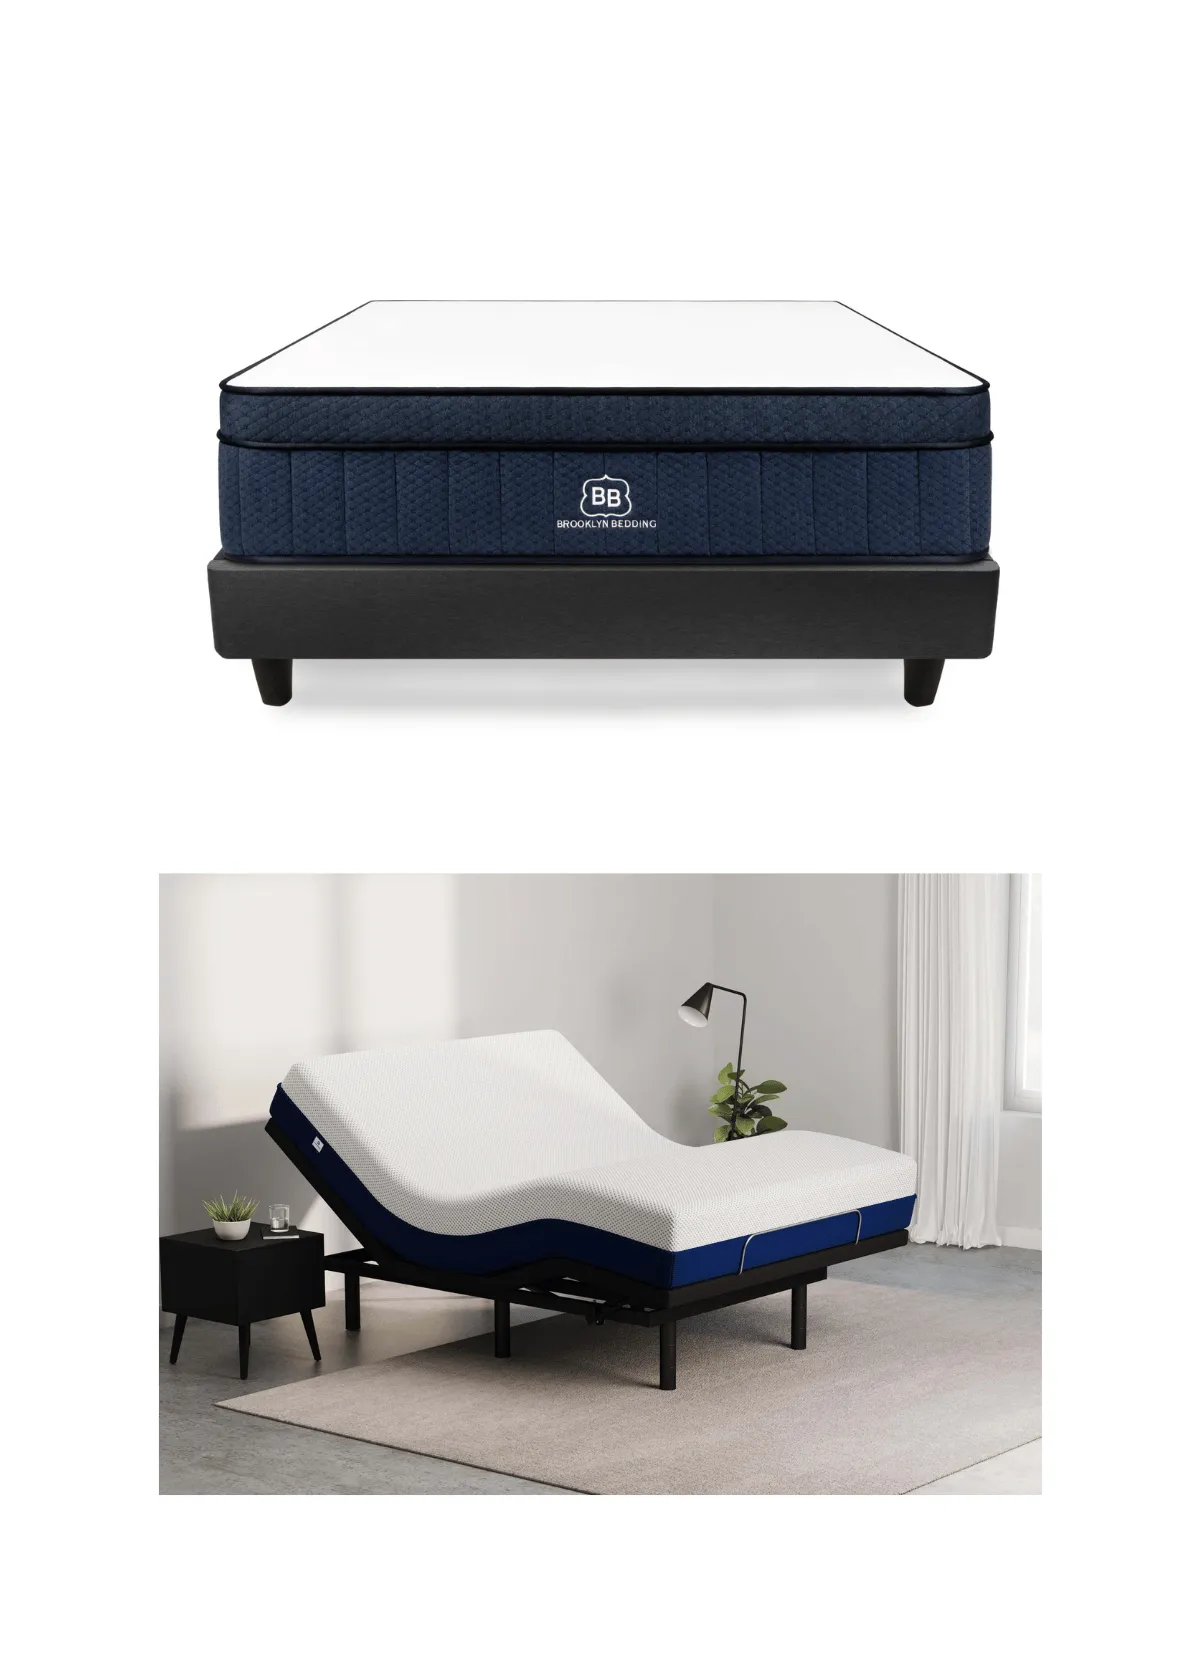 "The Best Bed Frames for Tall People: Top Picks for a Comfy Sleep"